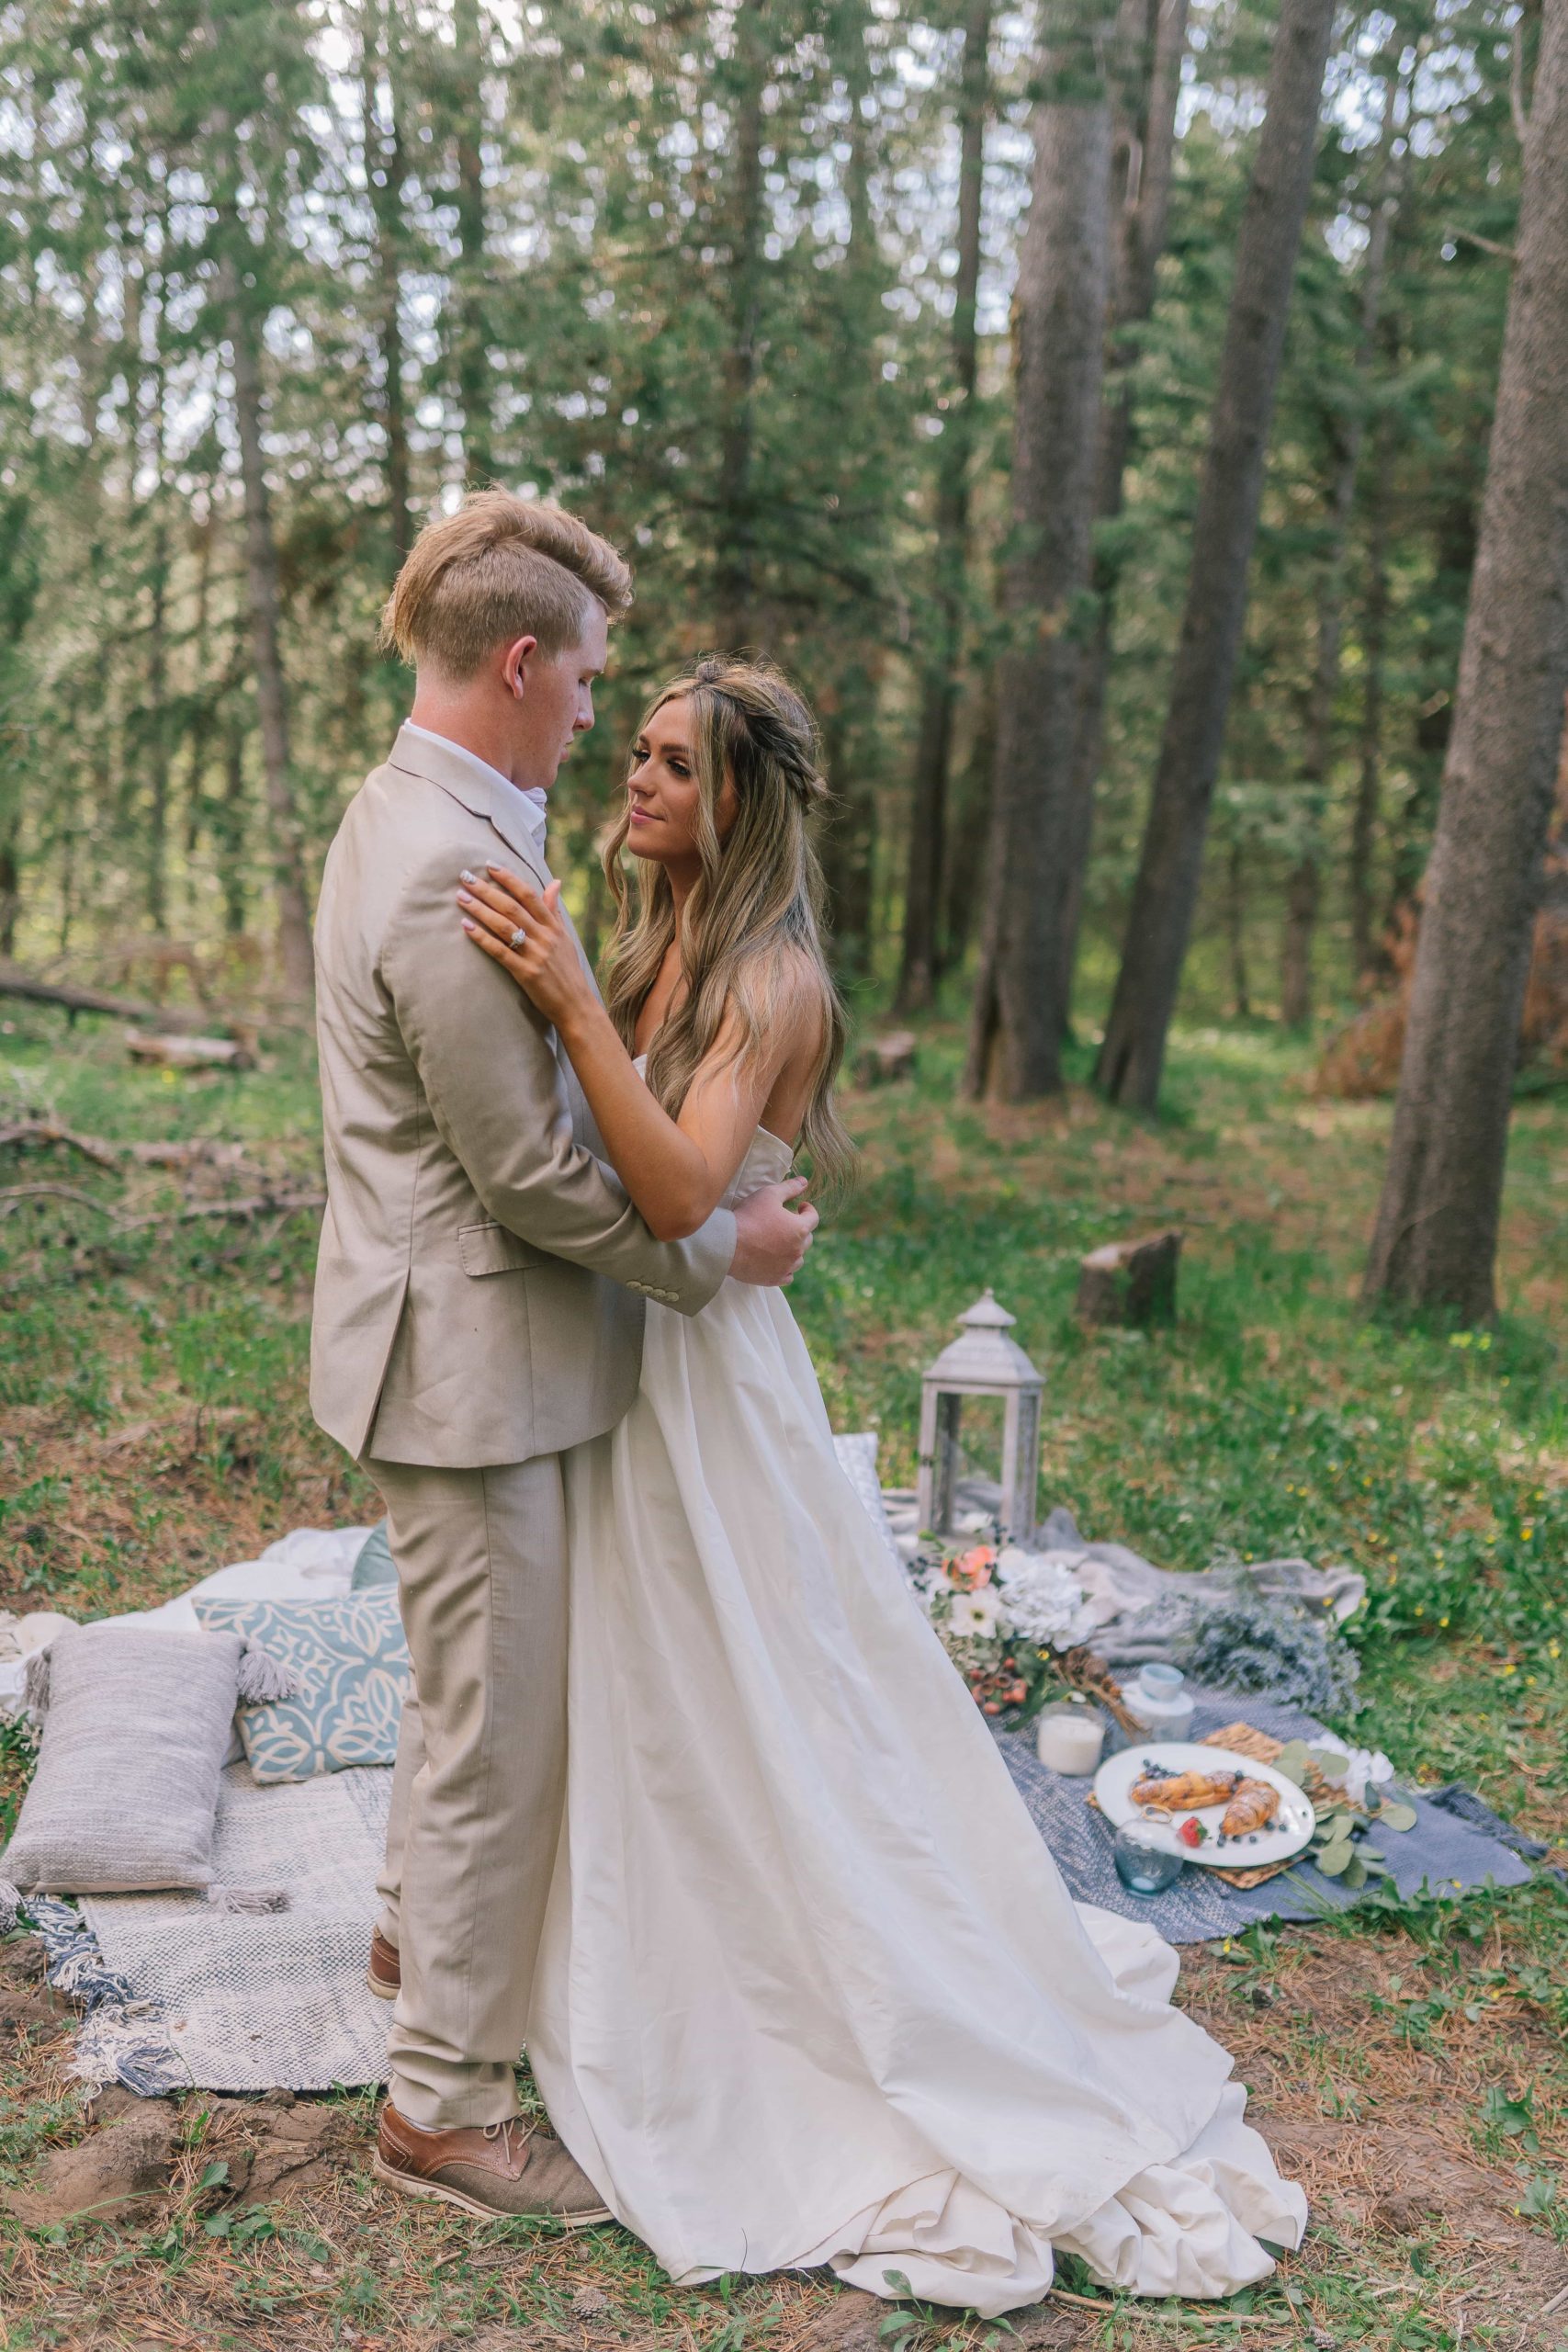 Groom and bride looking at each other while standing on a picnic blanket with pillows